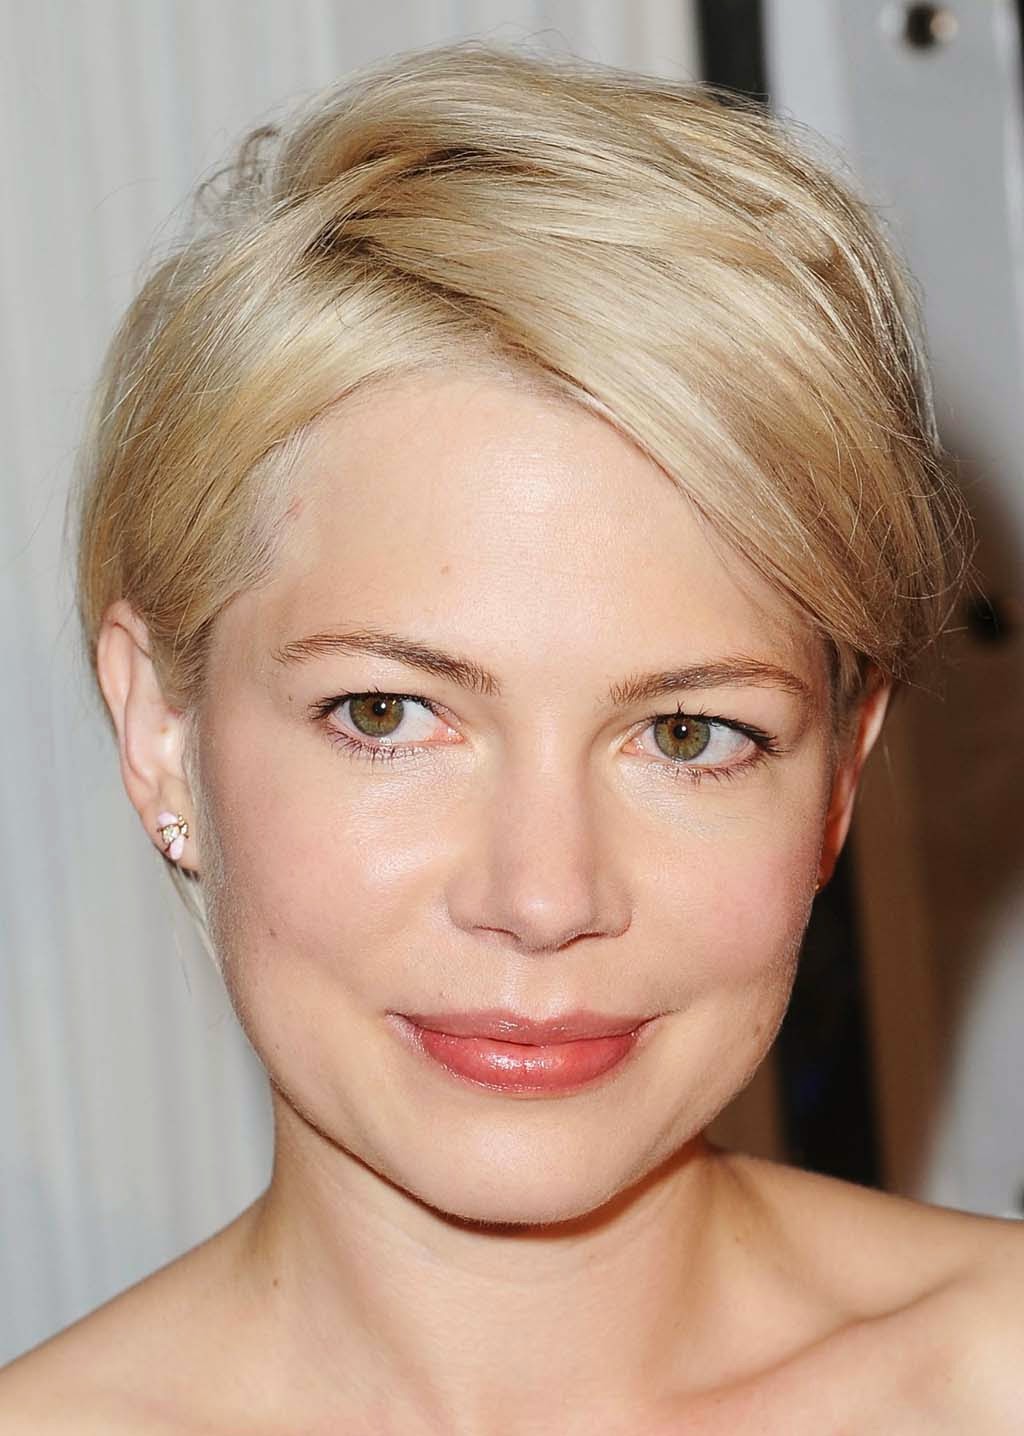 Superb Hairstyle: Short Cool Hairstyles for Round Faces